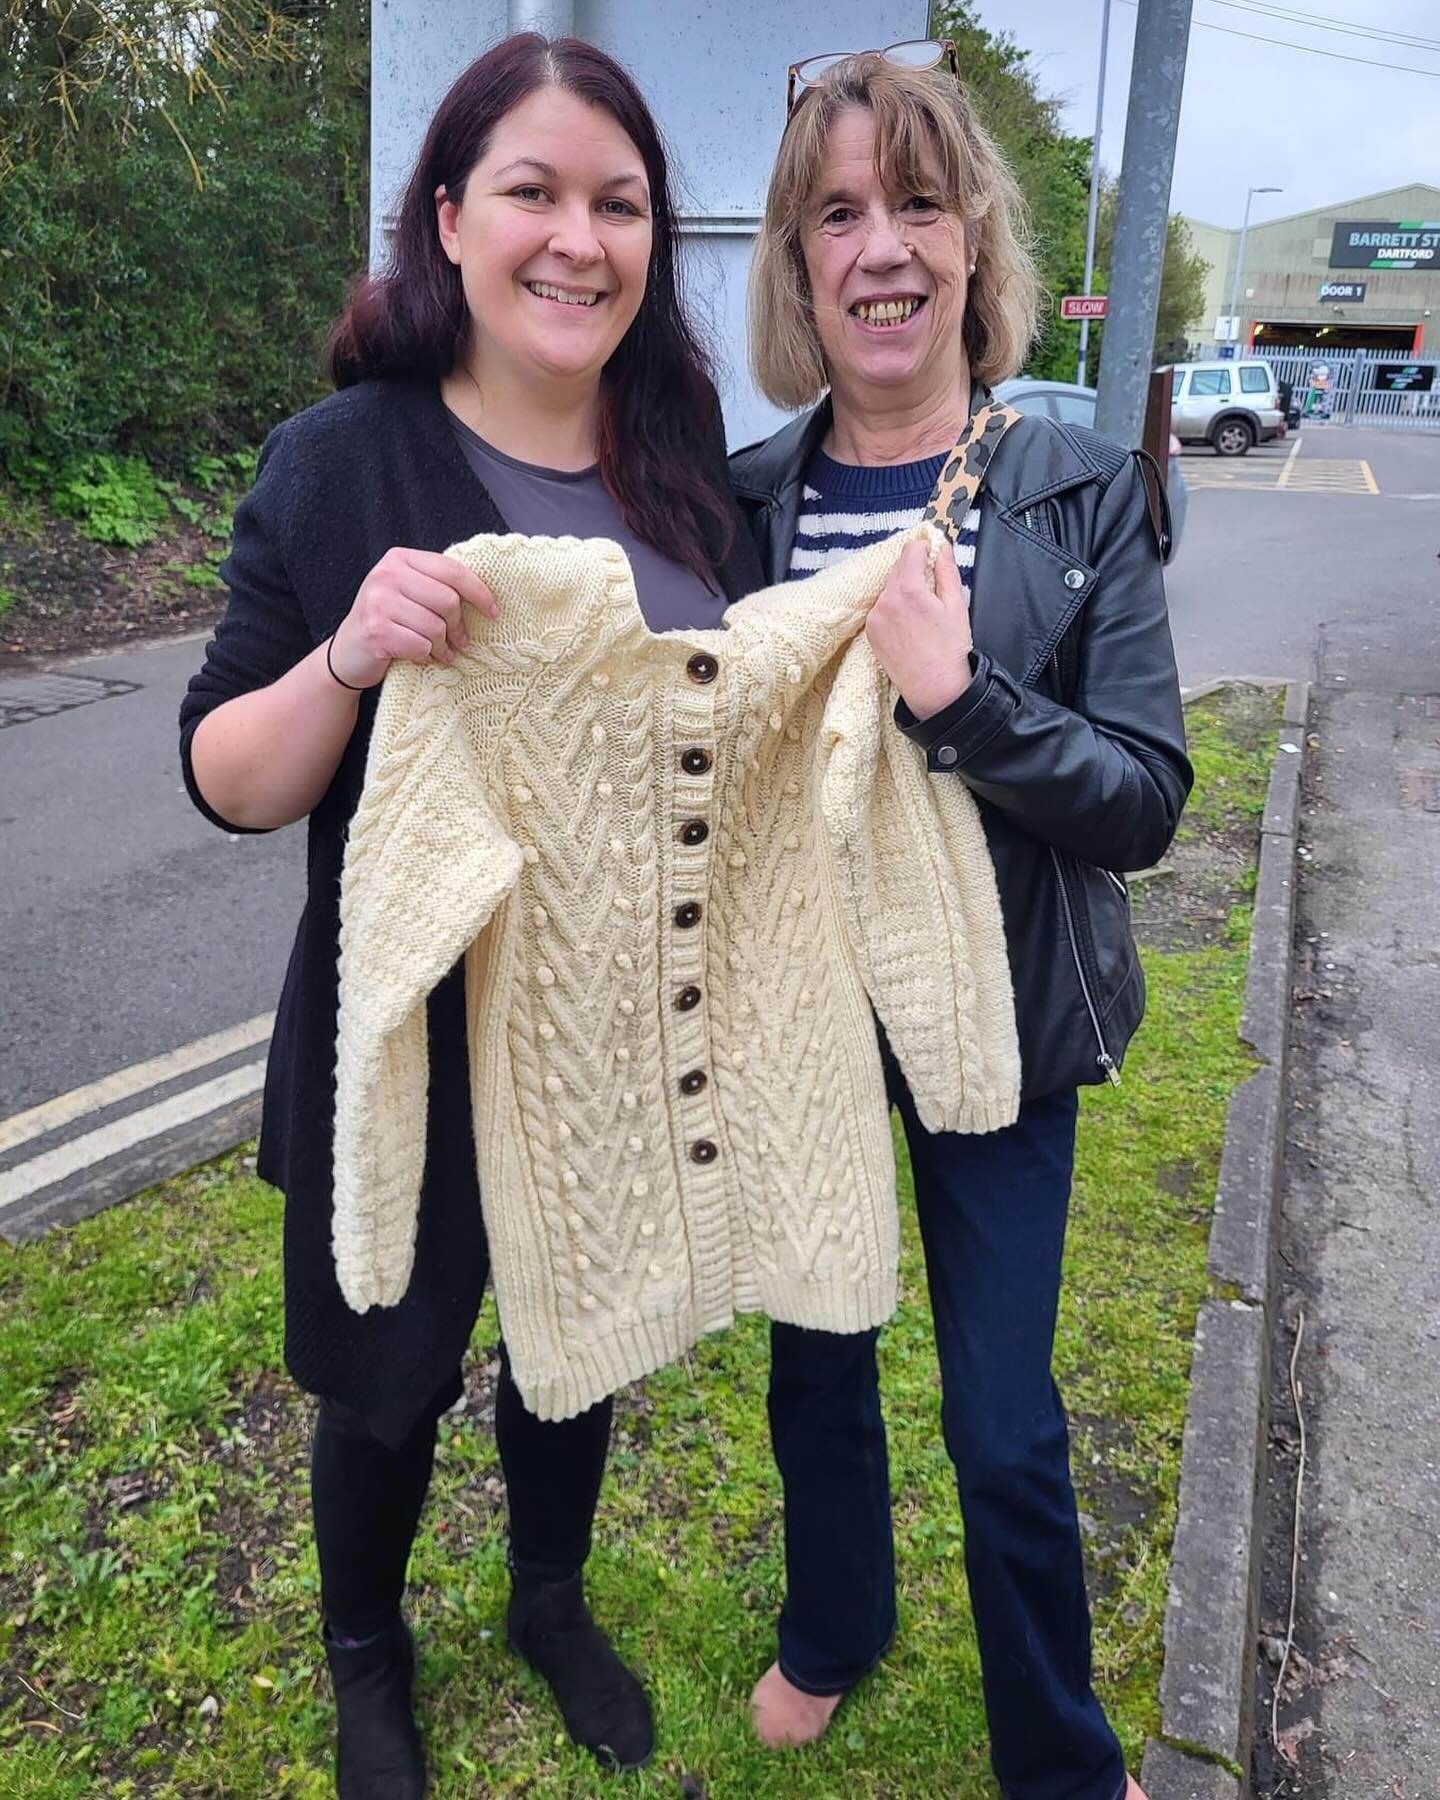 &ldquo;It means everything to me to have something that she has worked on. My brothers have the shawls that she knitted when their children were born, so this is my little bit of Mum to keep and cherish.&rdquo; 

&ldquo;Mum (Ria) was diagnosed with l